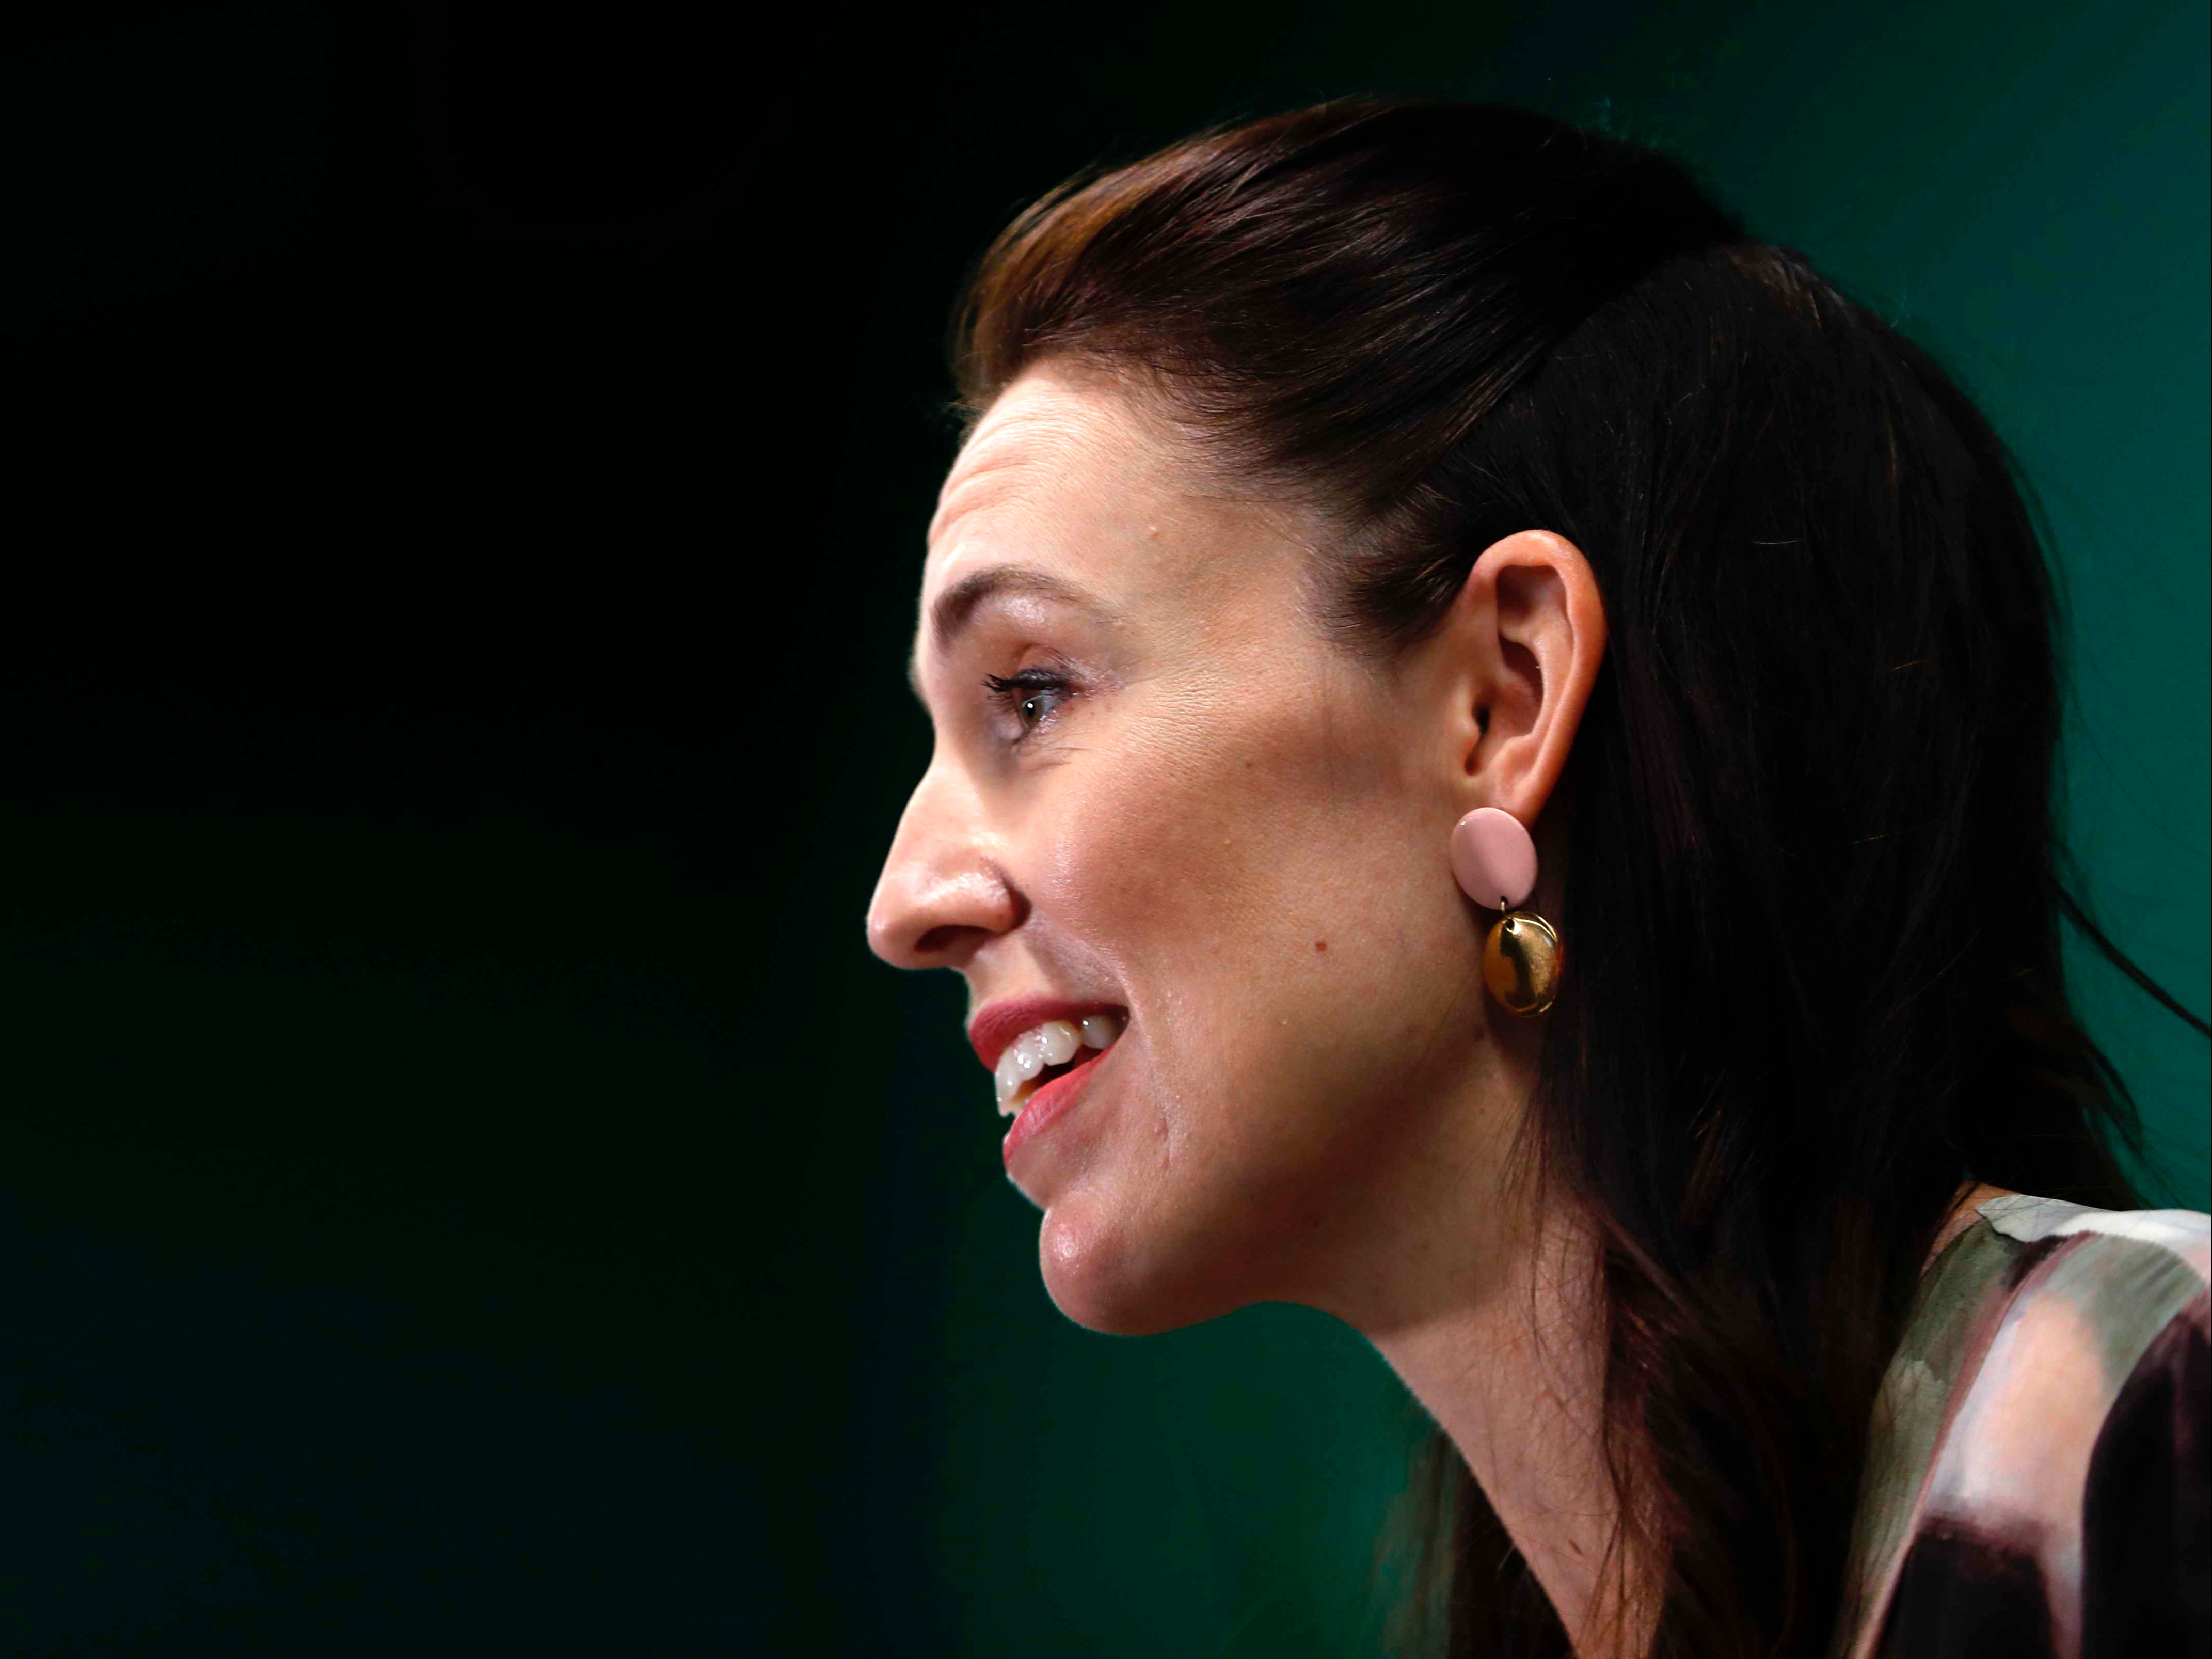 Jacinda Ardern outlines the New Zealand government’s plans to reopen the country’s borders